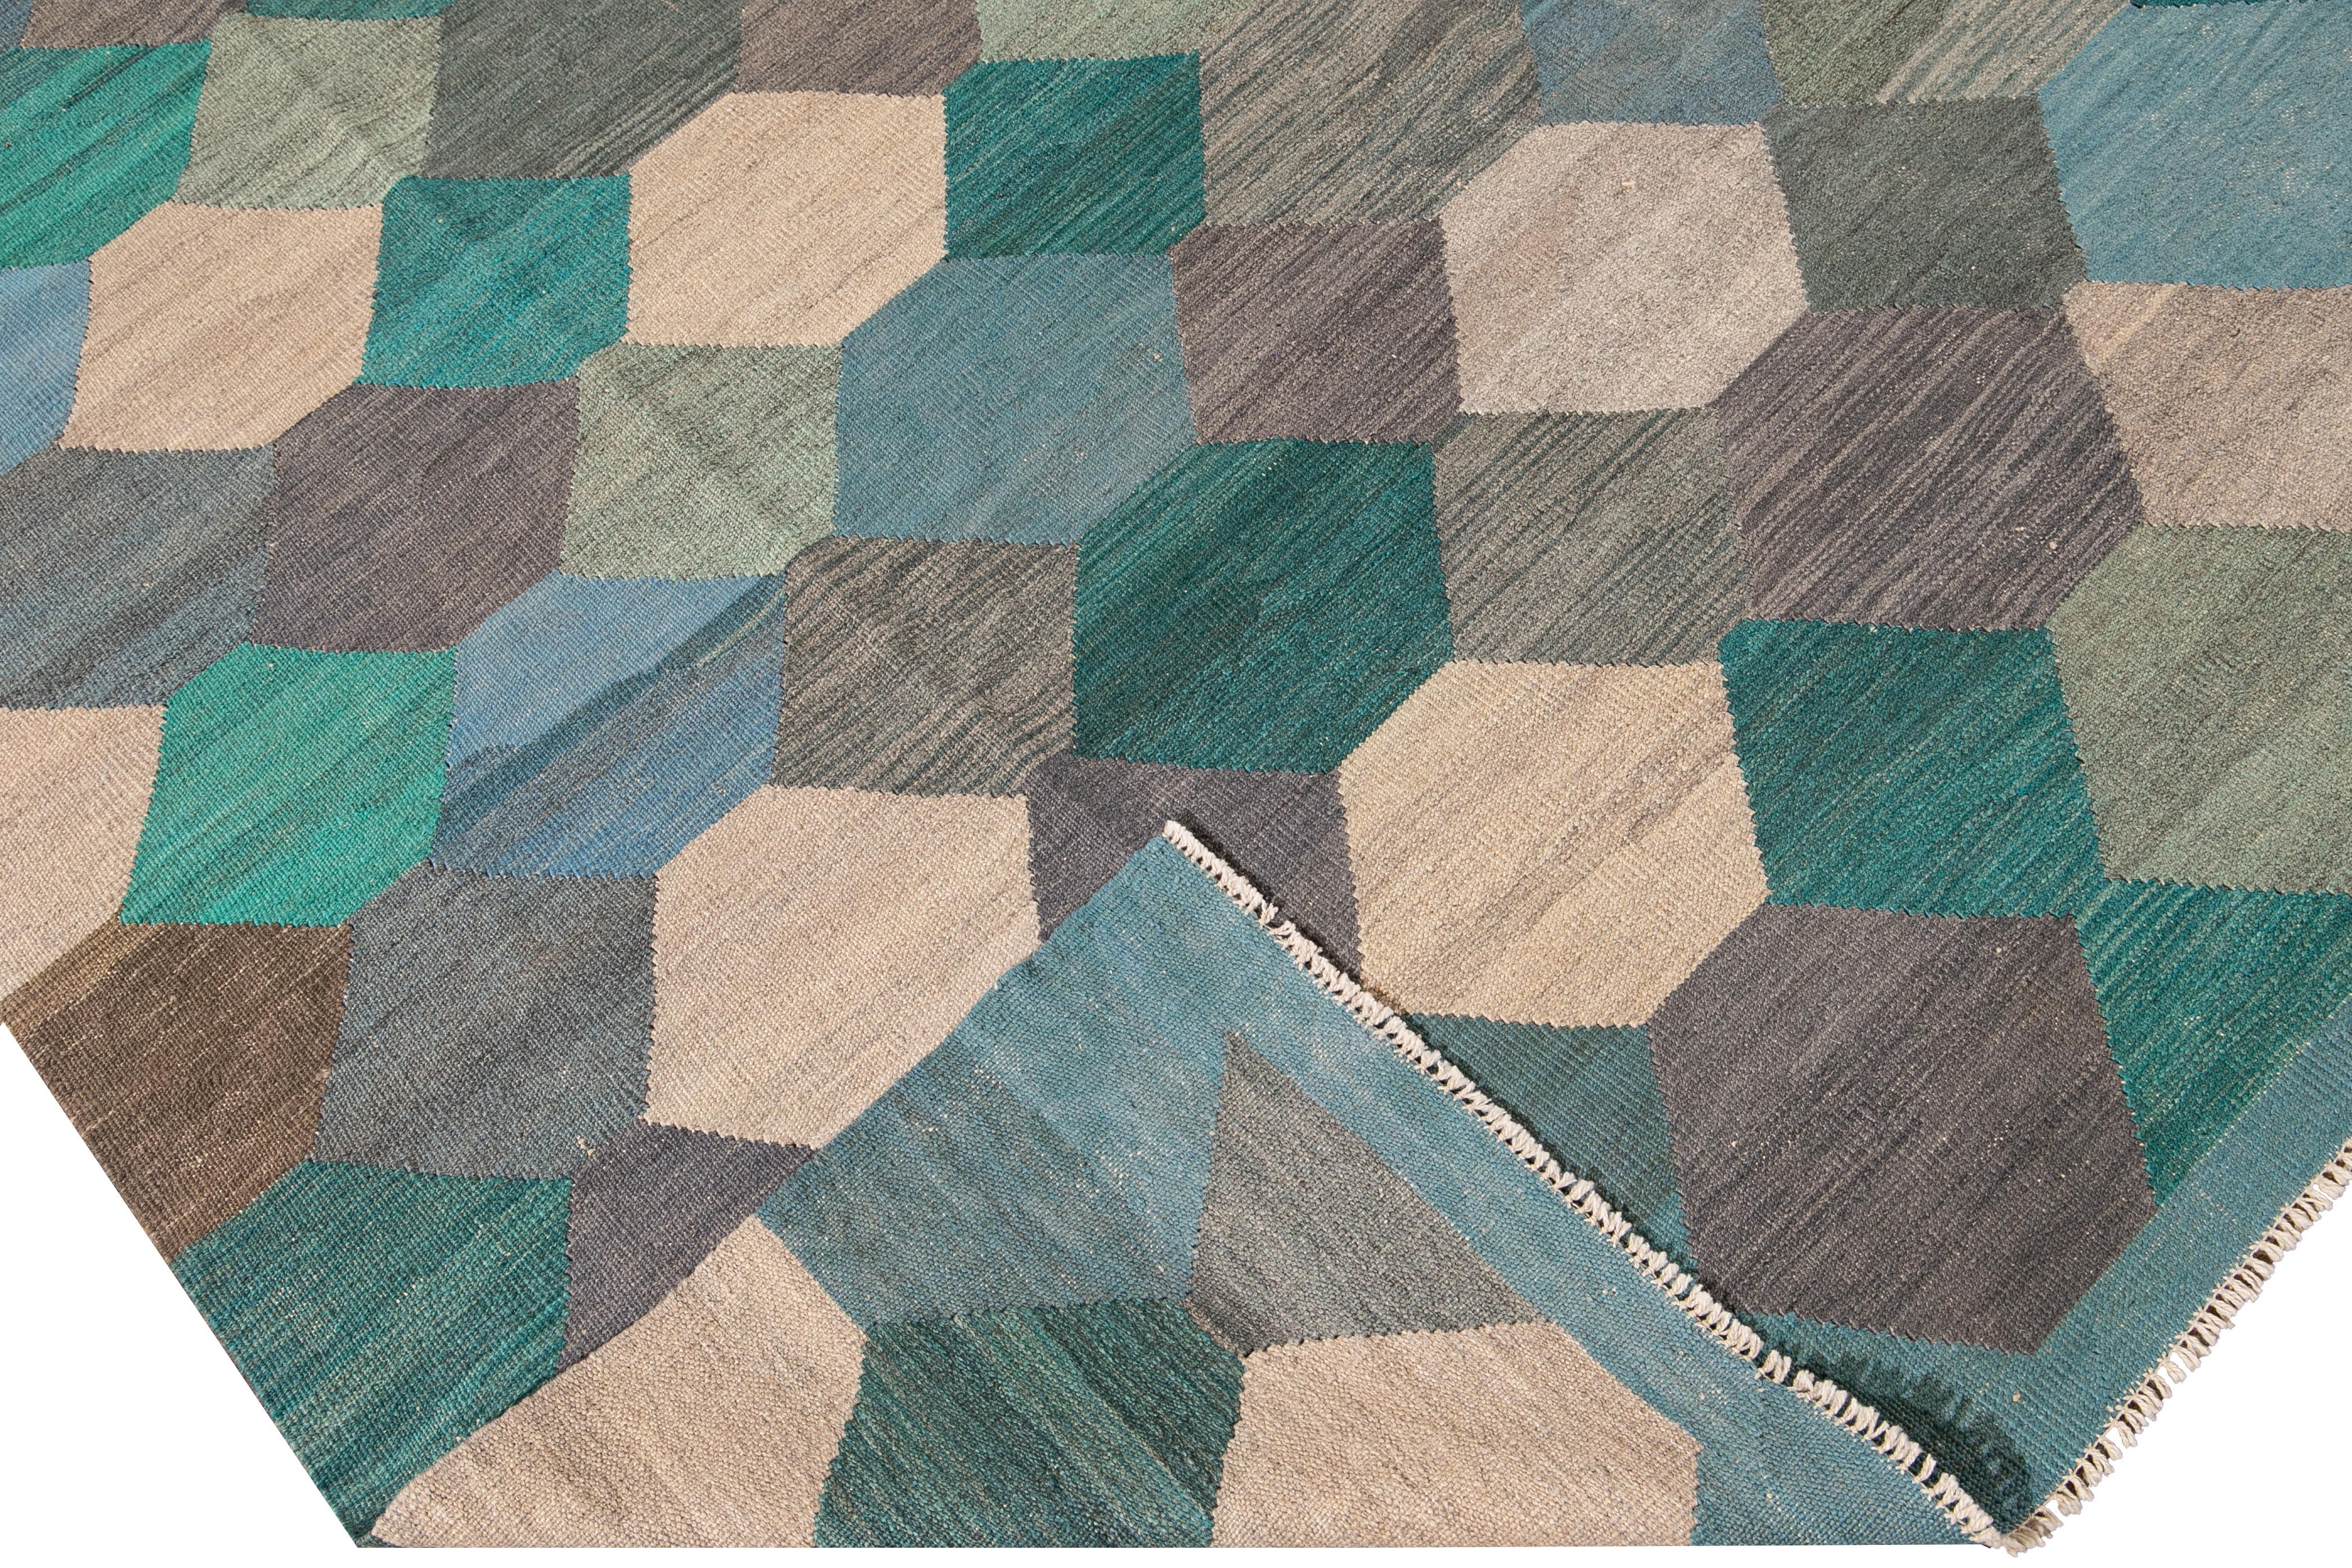 Beautiful modern Kilim flat-weave wool rug. This kilim rug has a green, beige, blue, and gray field in a gorgeous geometric hexagon pattern design.

This rug measures: 8'2